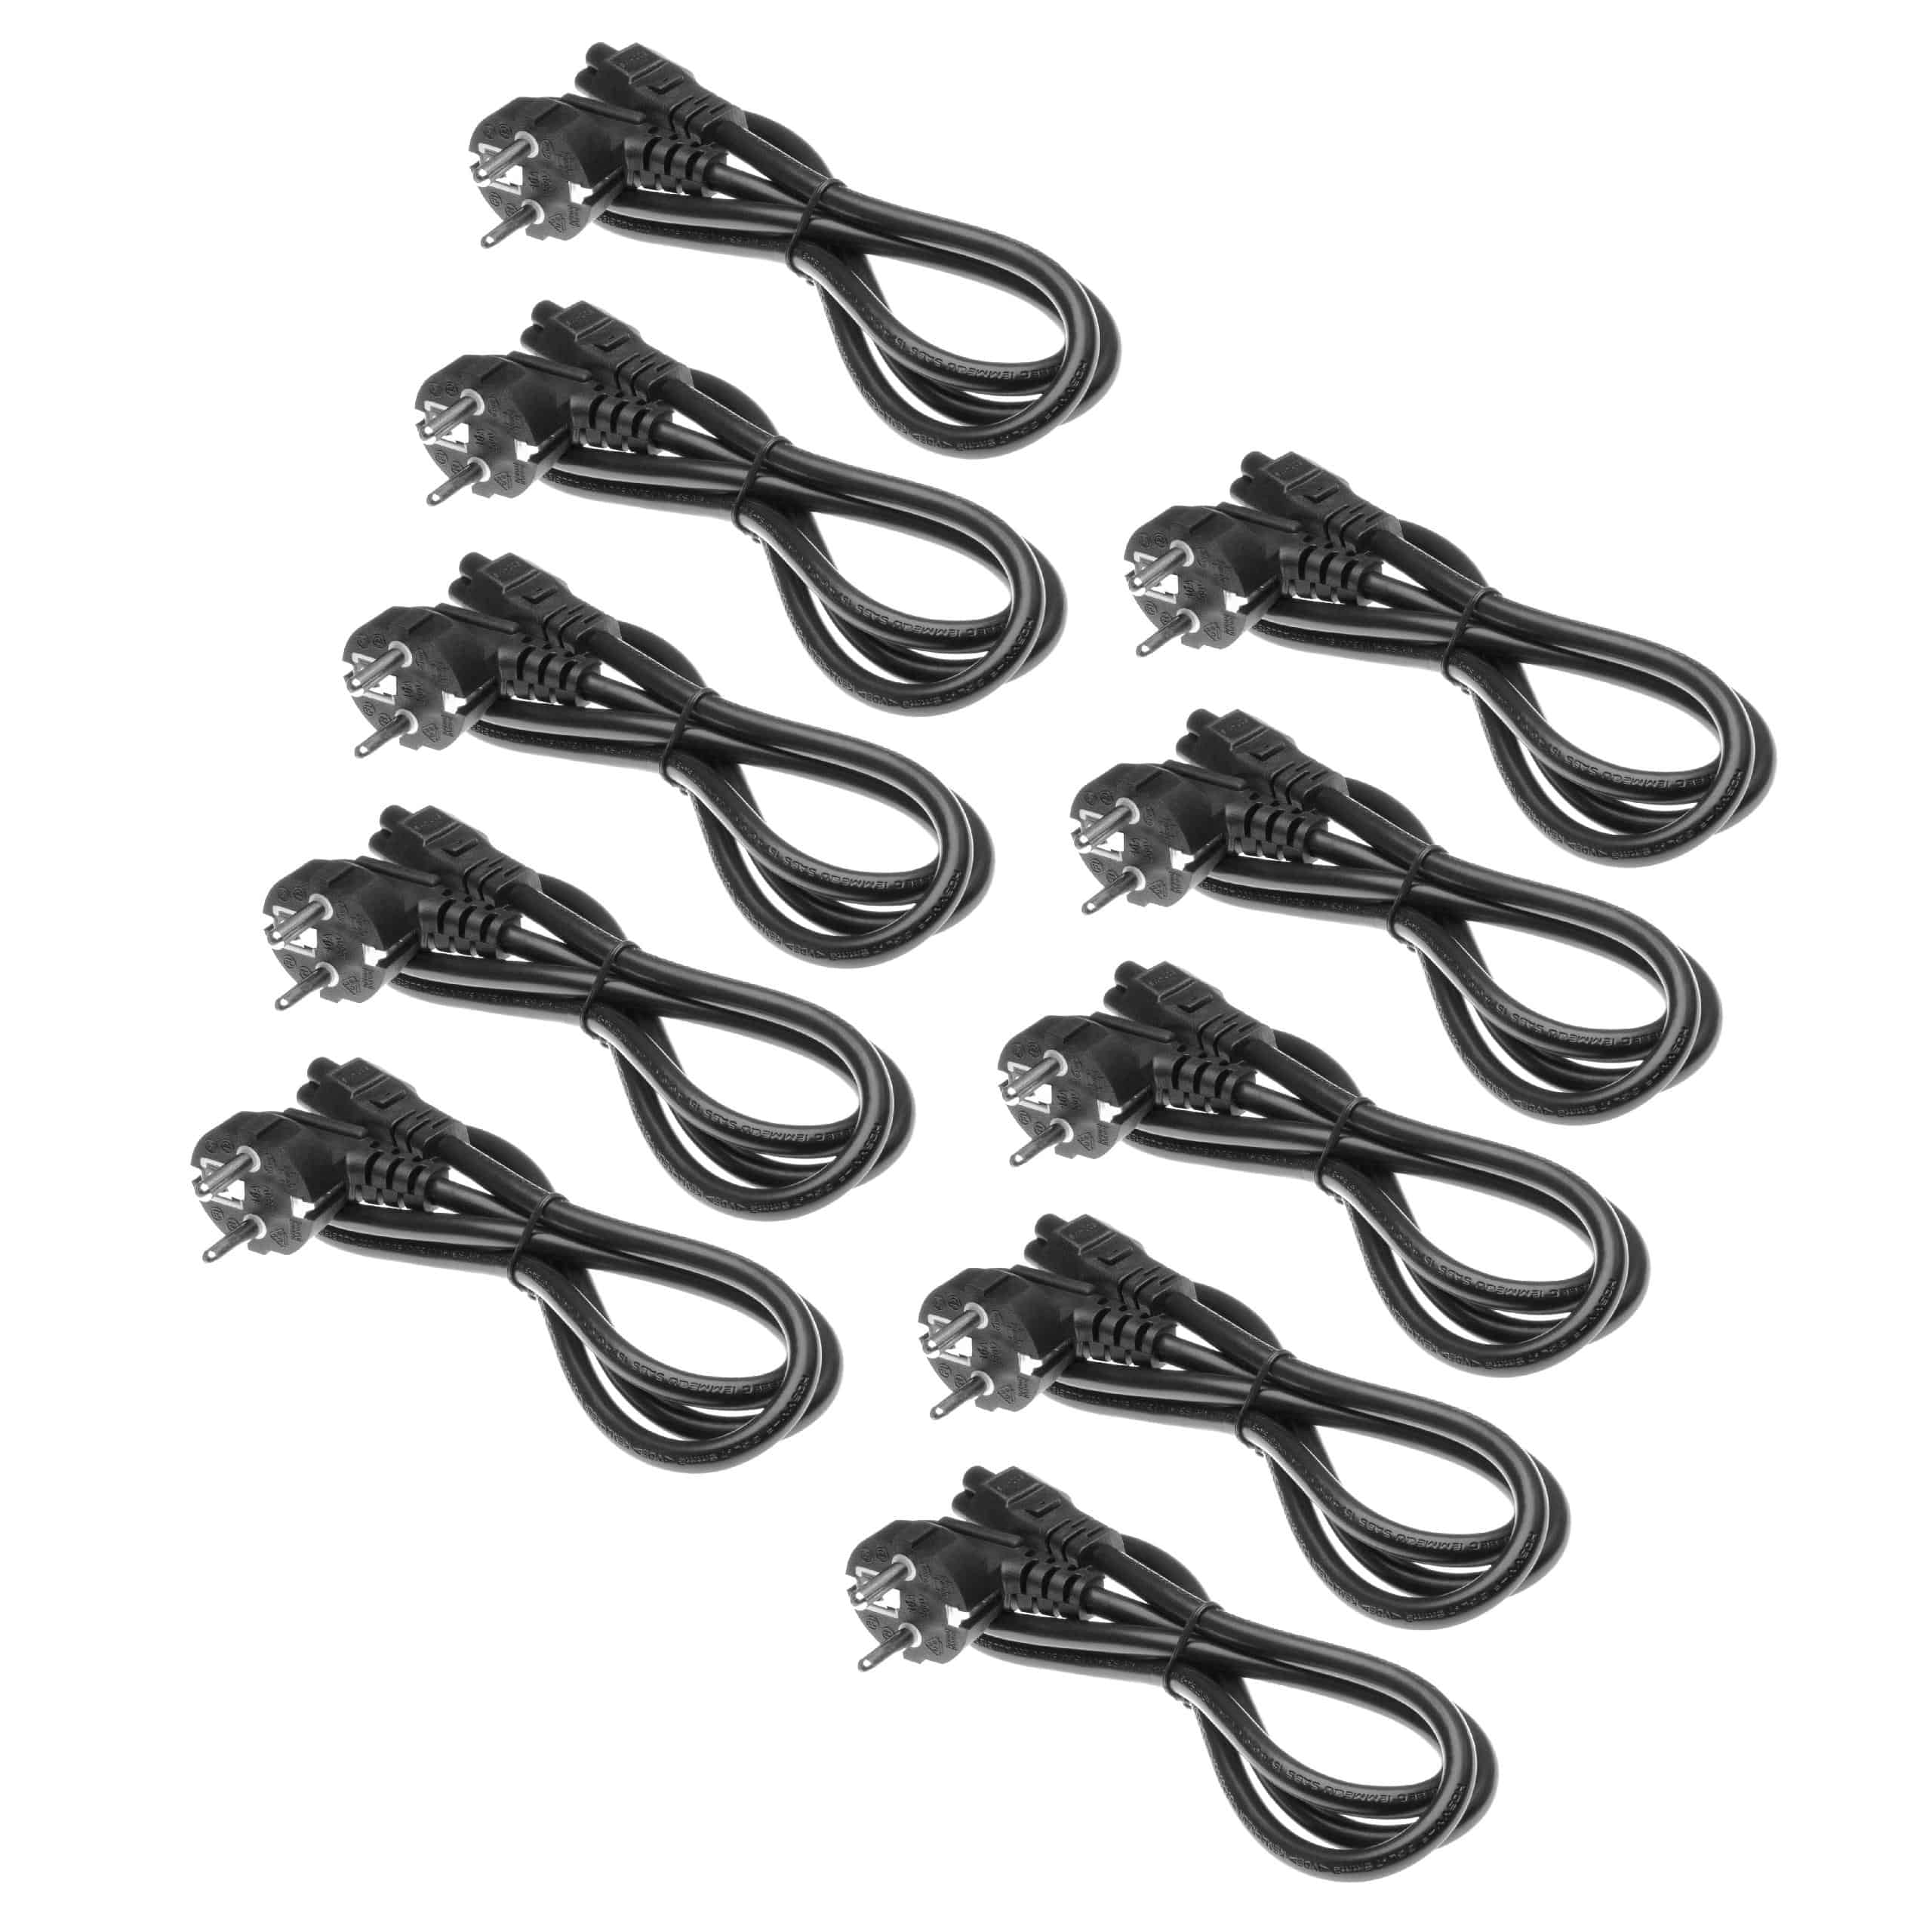 10x C5 Power Cable Euro Plug suitable for Robot Vacuum Cleaner - 1.2 m